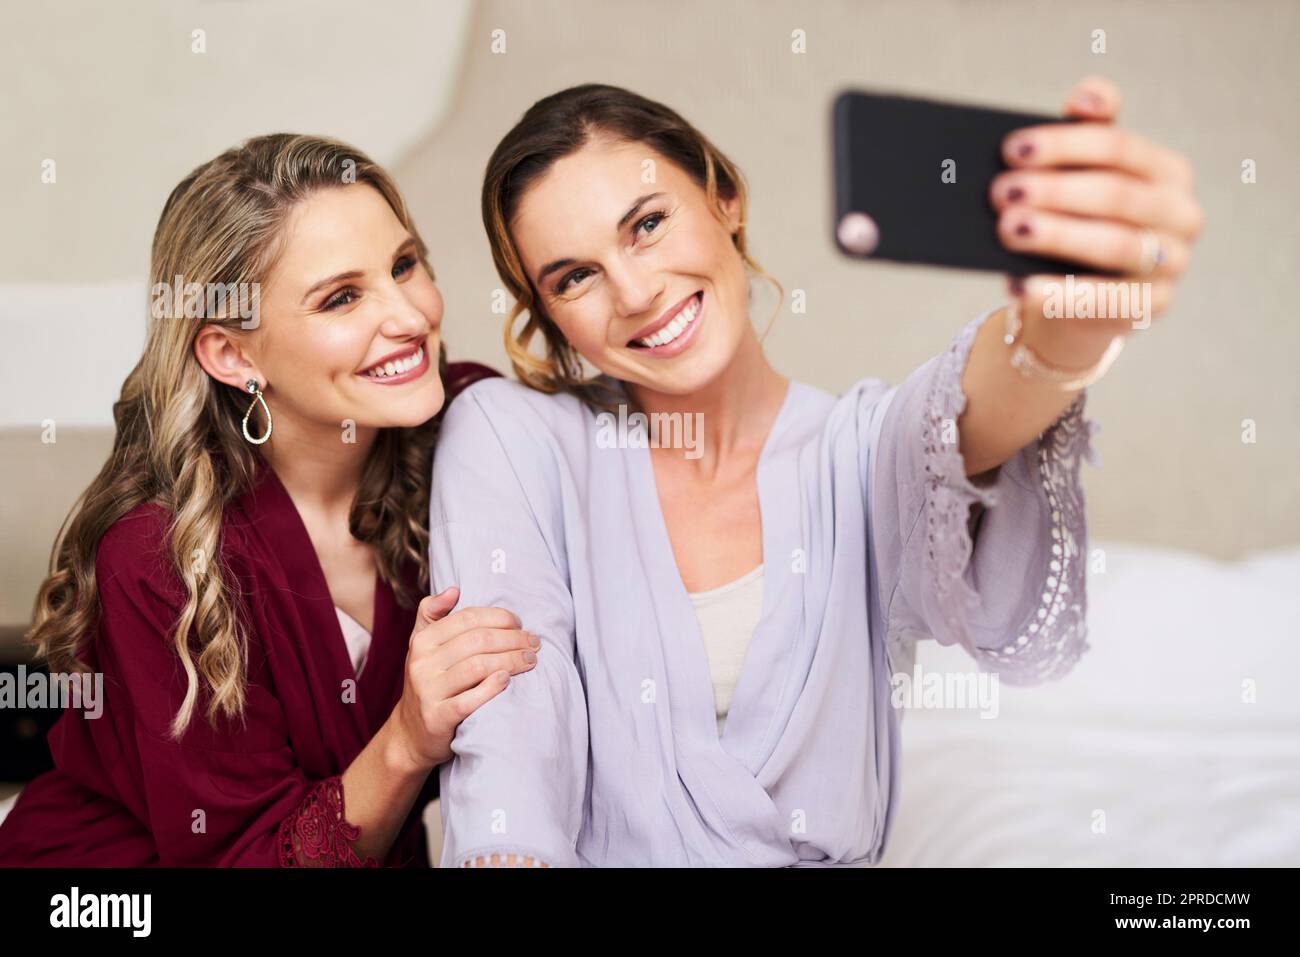 The days finally here. a beautiful young bride and her best friend taking a selfie together in their dressing room before the wedding. Stock Photo